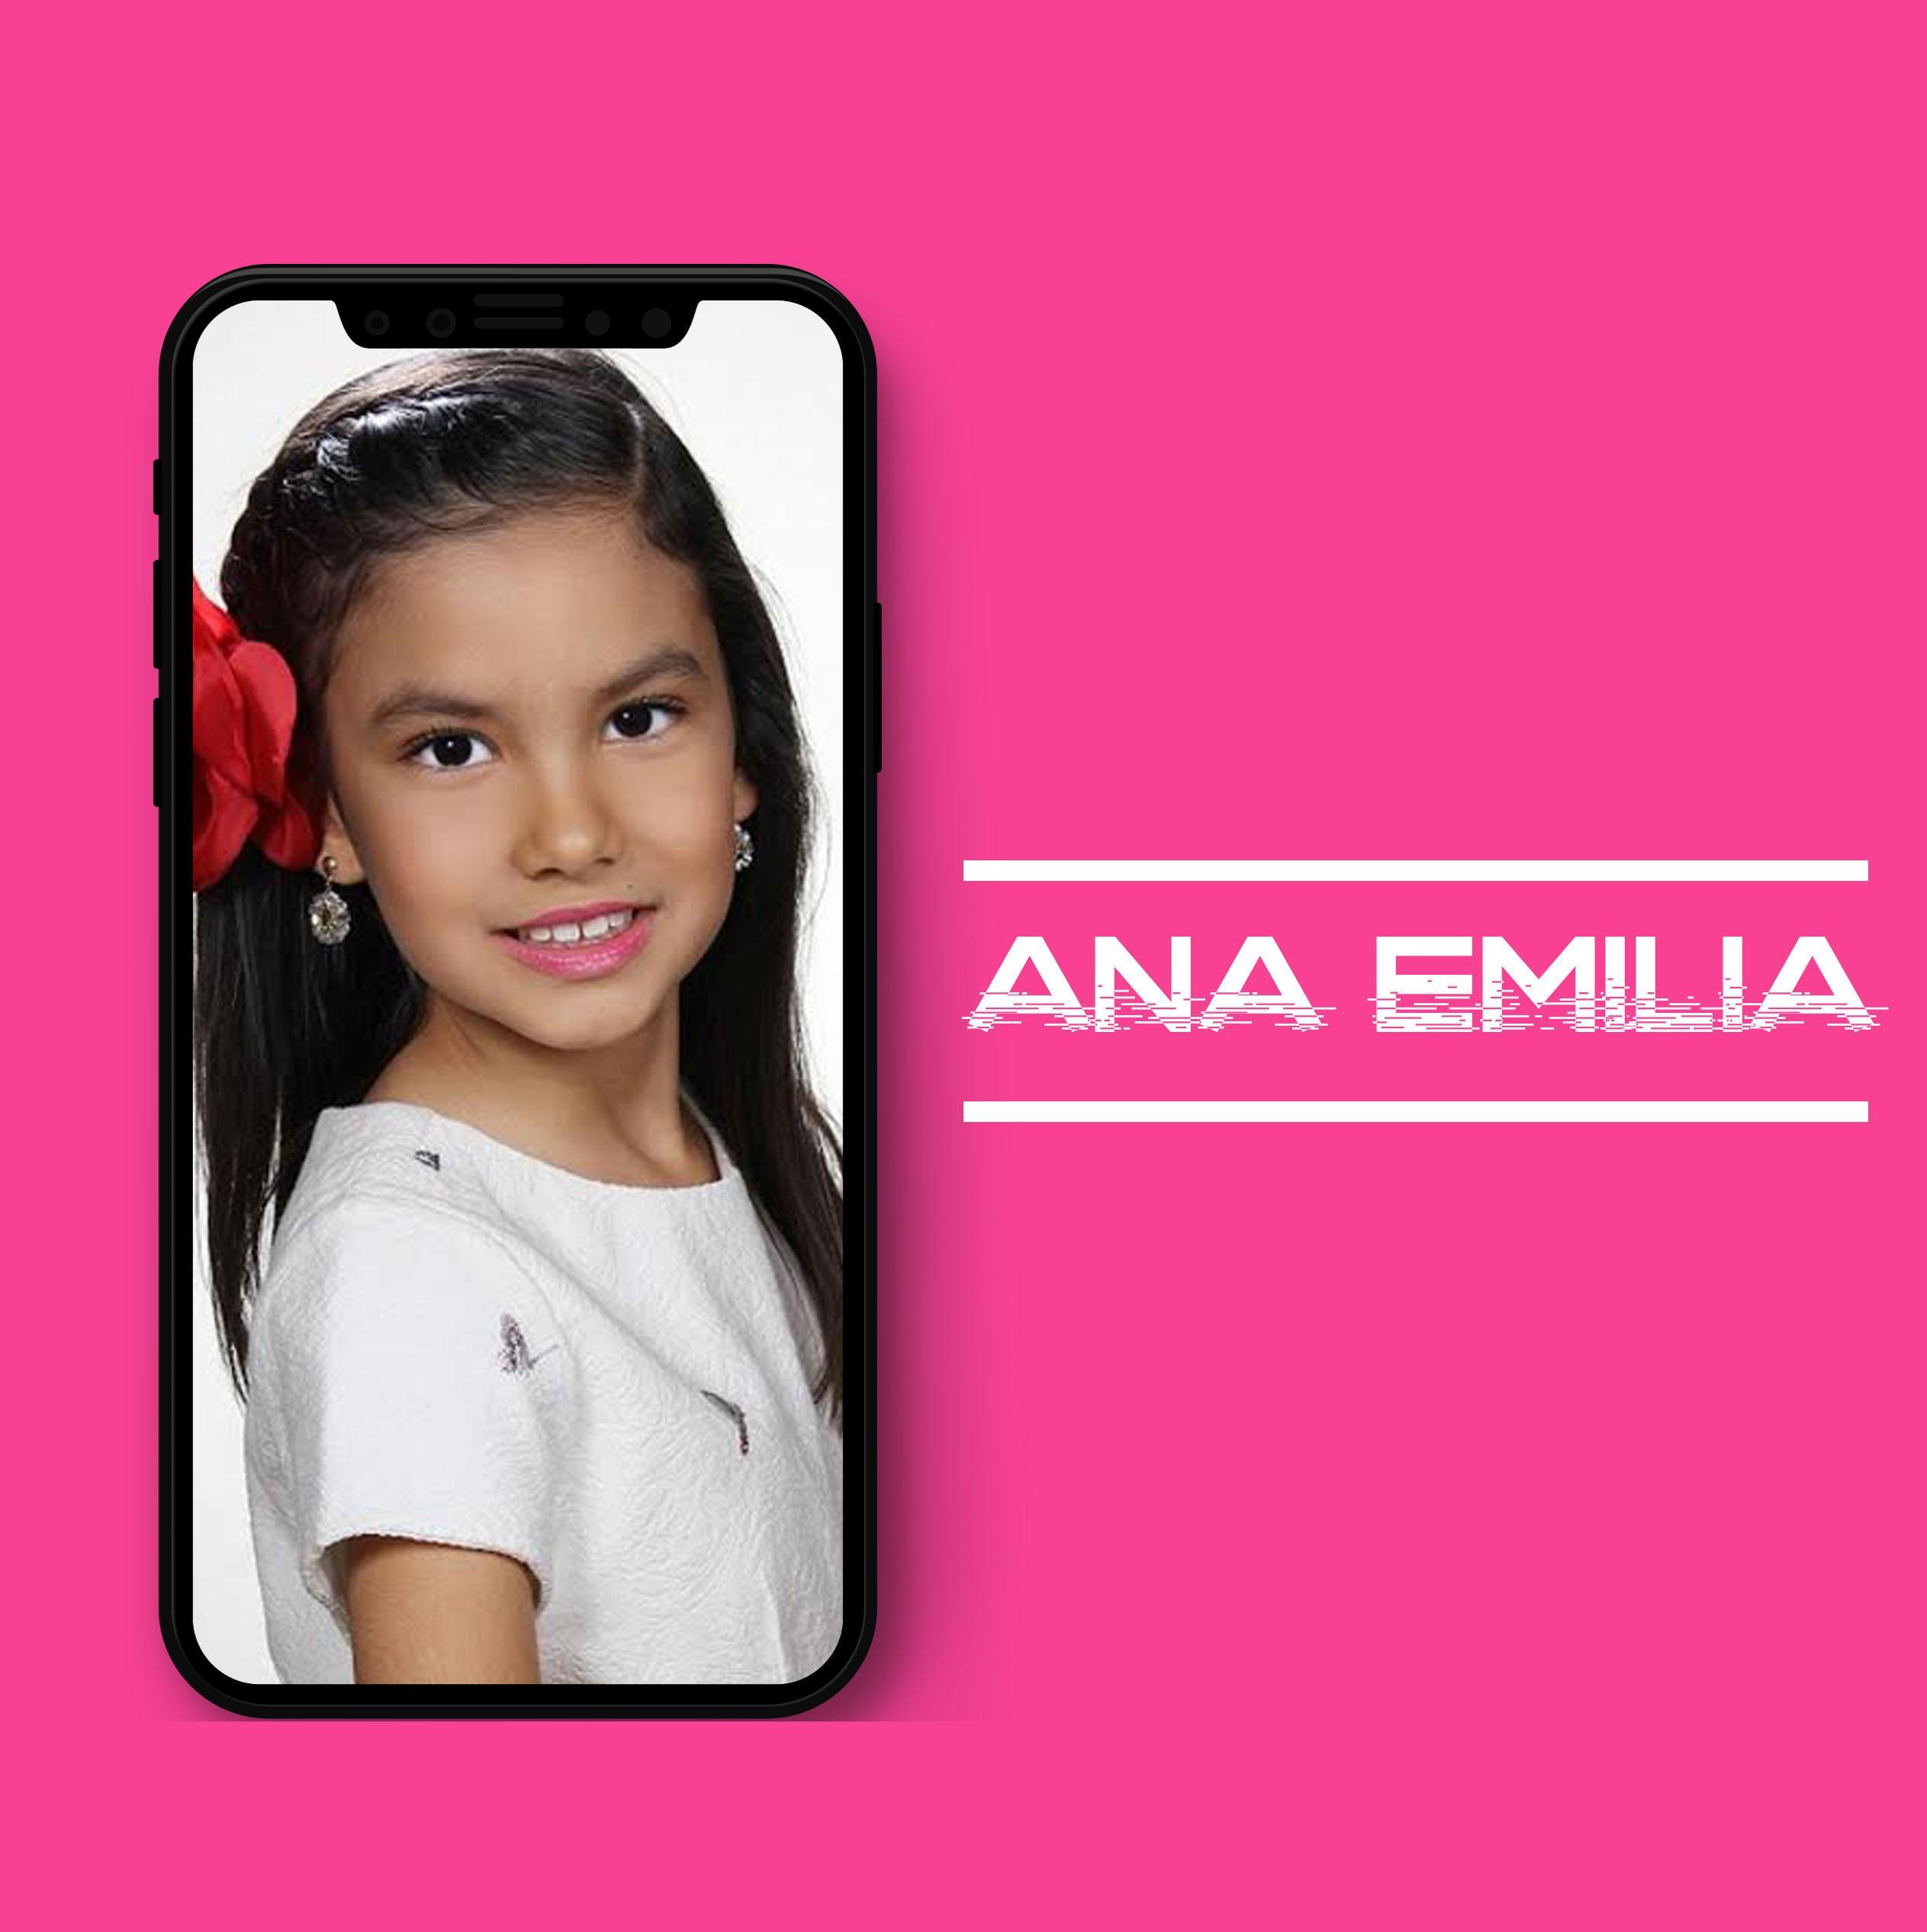 Ana Emilia Wallpaper Hd 4k For Android Apk Download